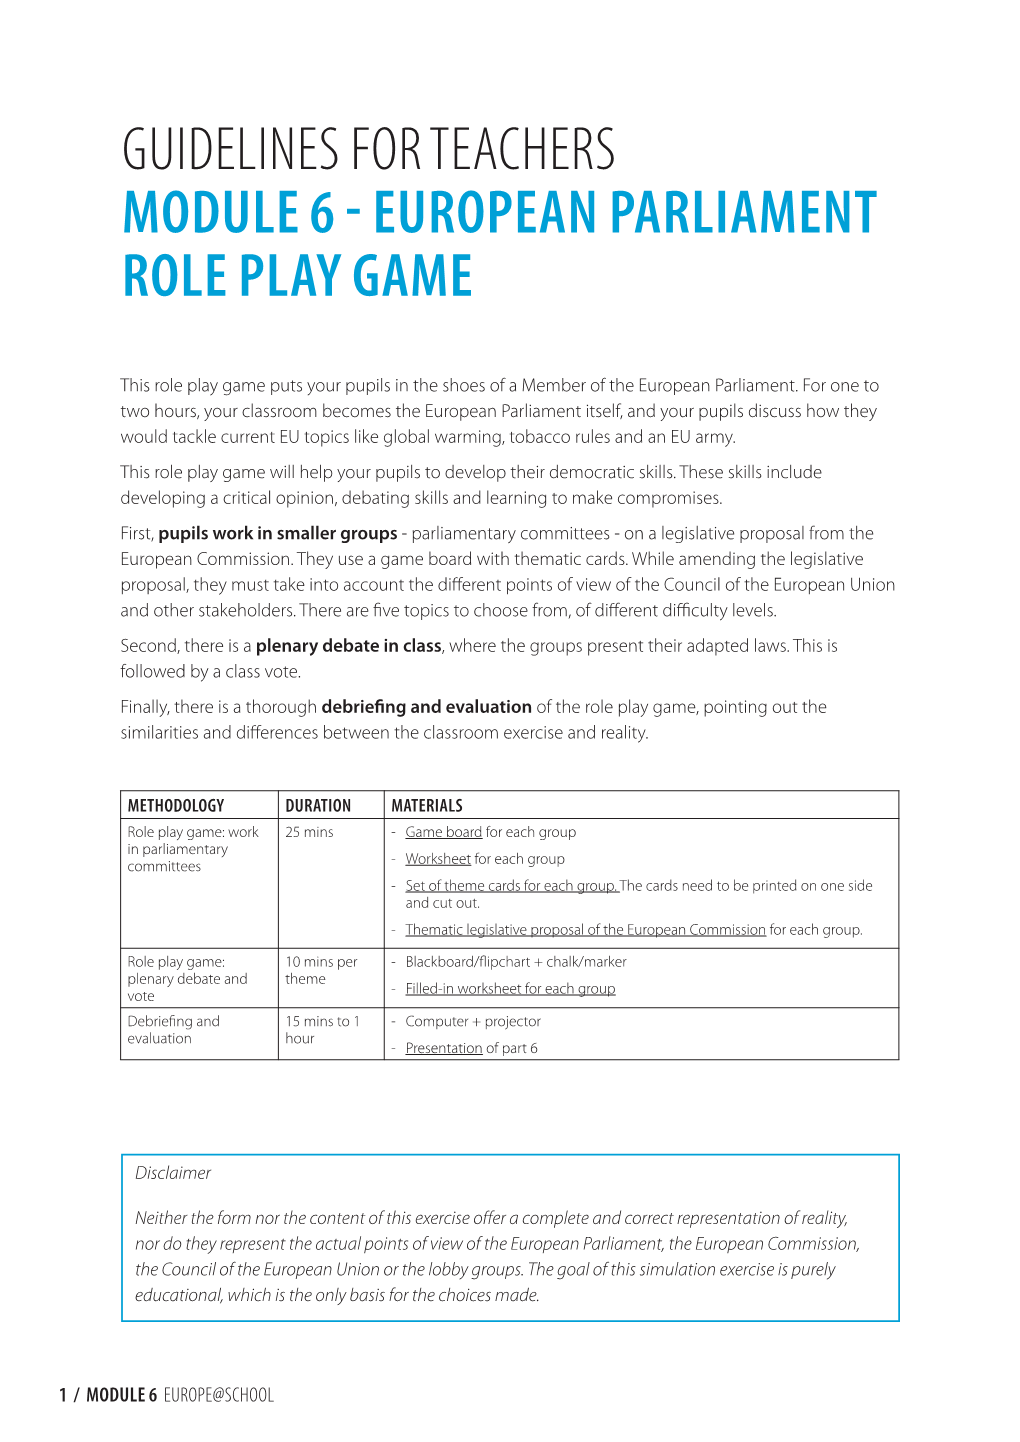 Guidelines for Teachers Module 6 - European Parliament Role Play Game